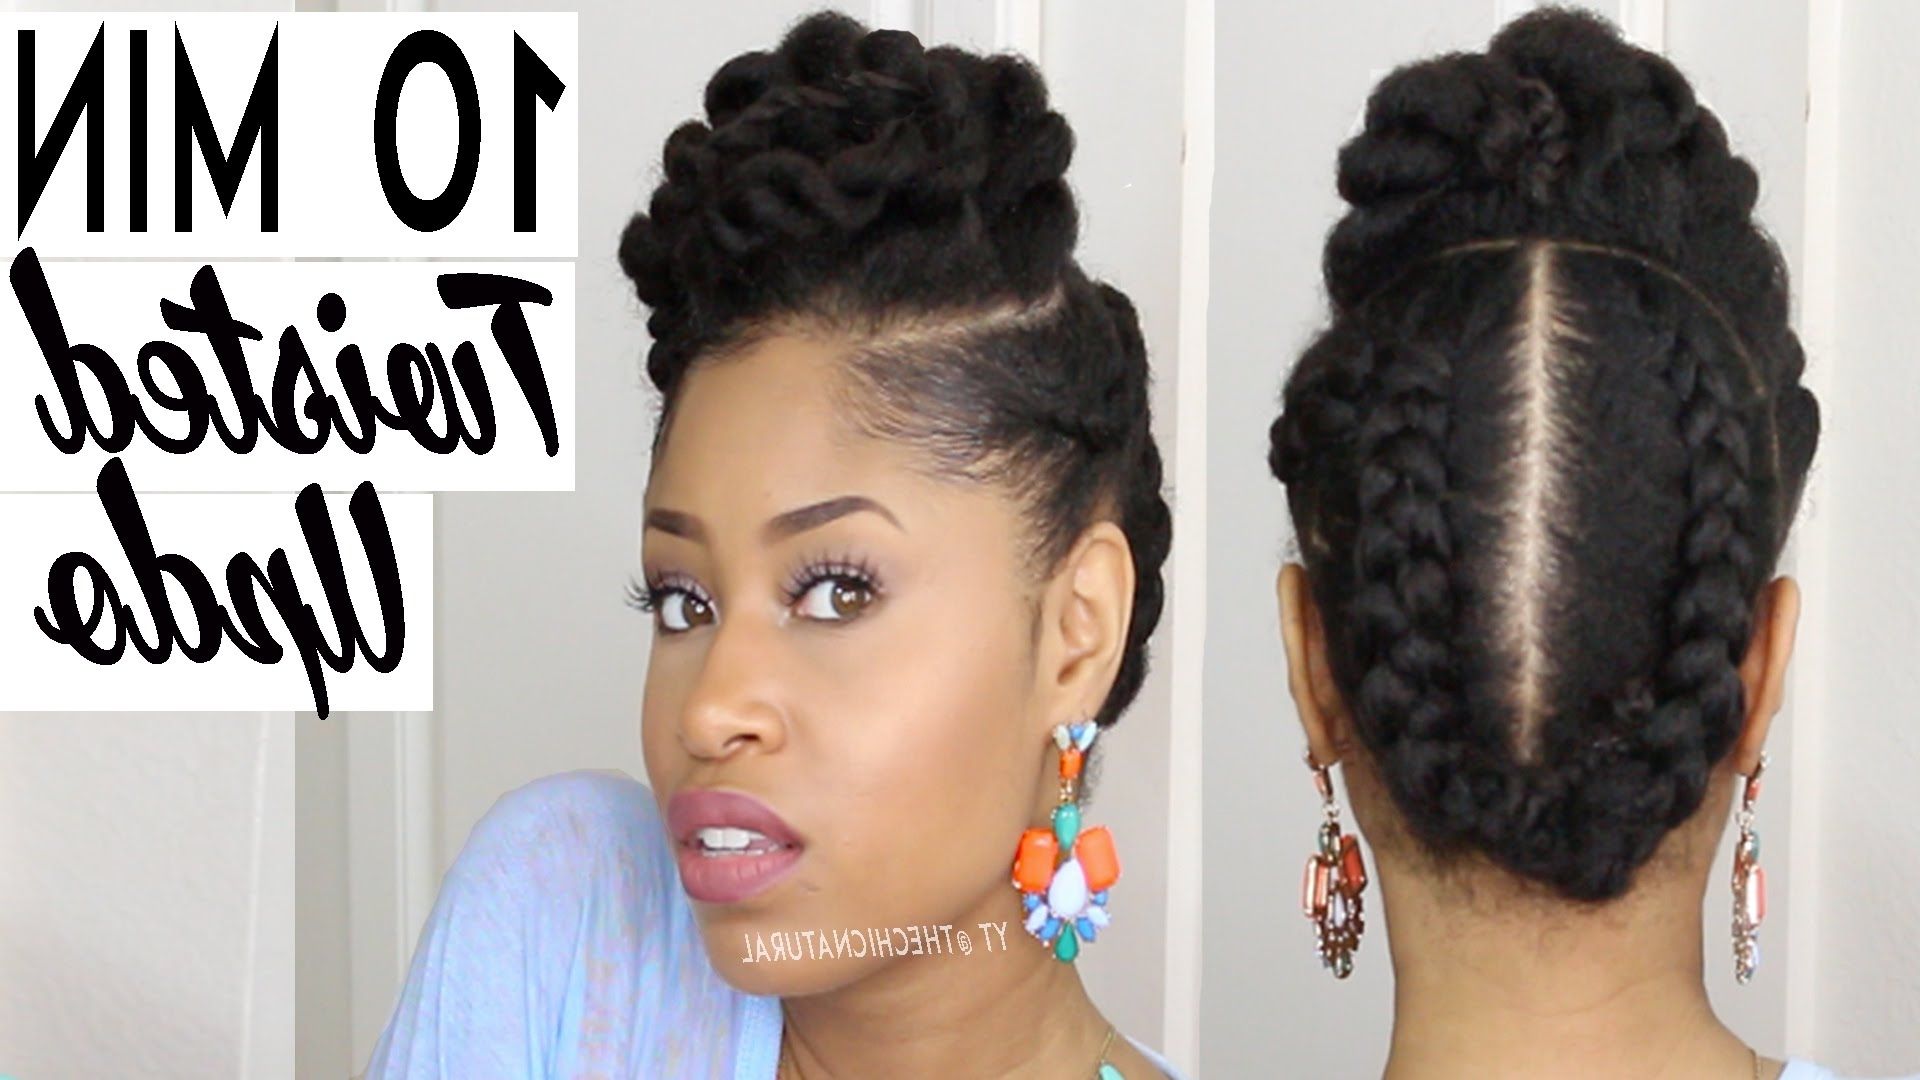 The 10 Minute Twisted Updo | Natural Hairstyle – Youtube Intended For Updos Hairstyles For Natural Black Hair (View 1 of 15)